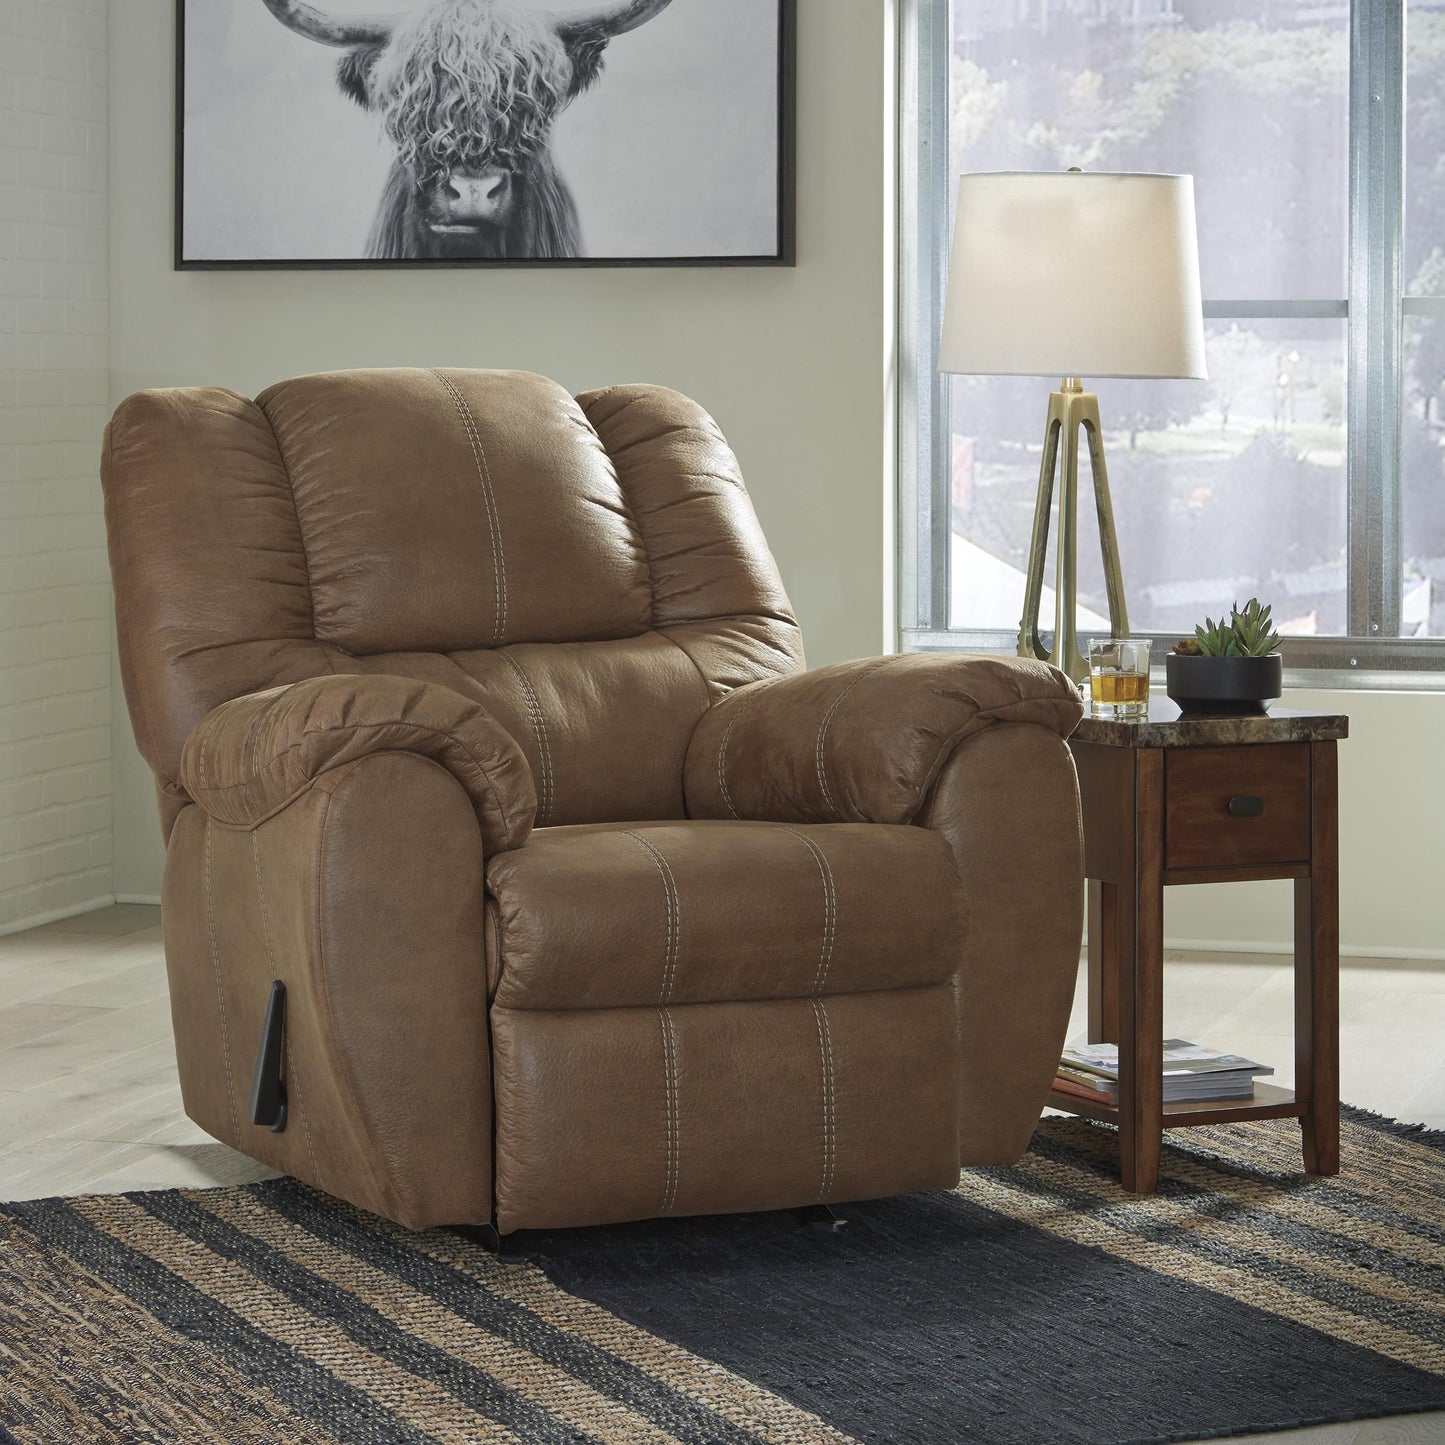 Signature Design by Ashley McGann Rocker Leather Look Recliner 1030225 IMAGE 3